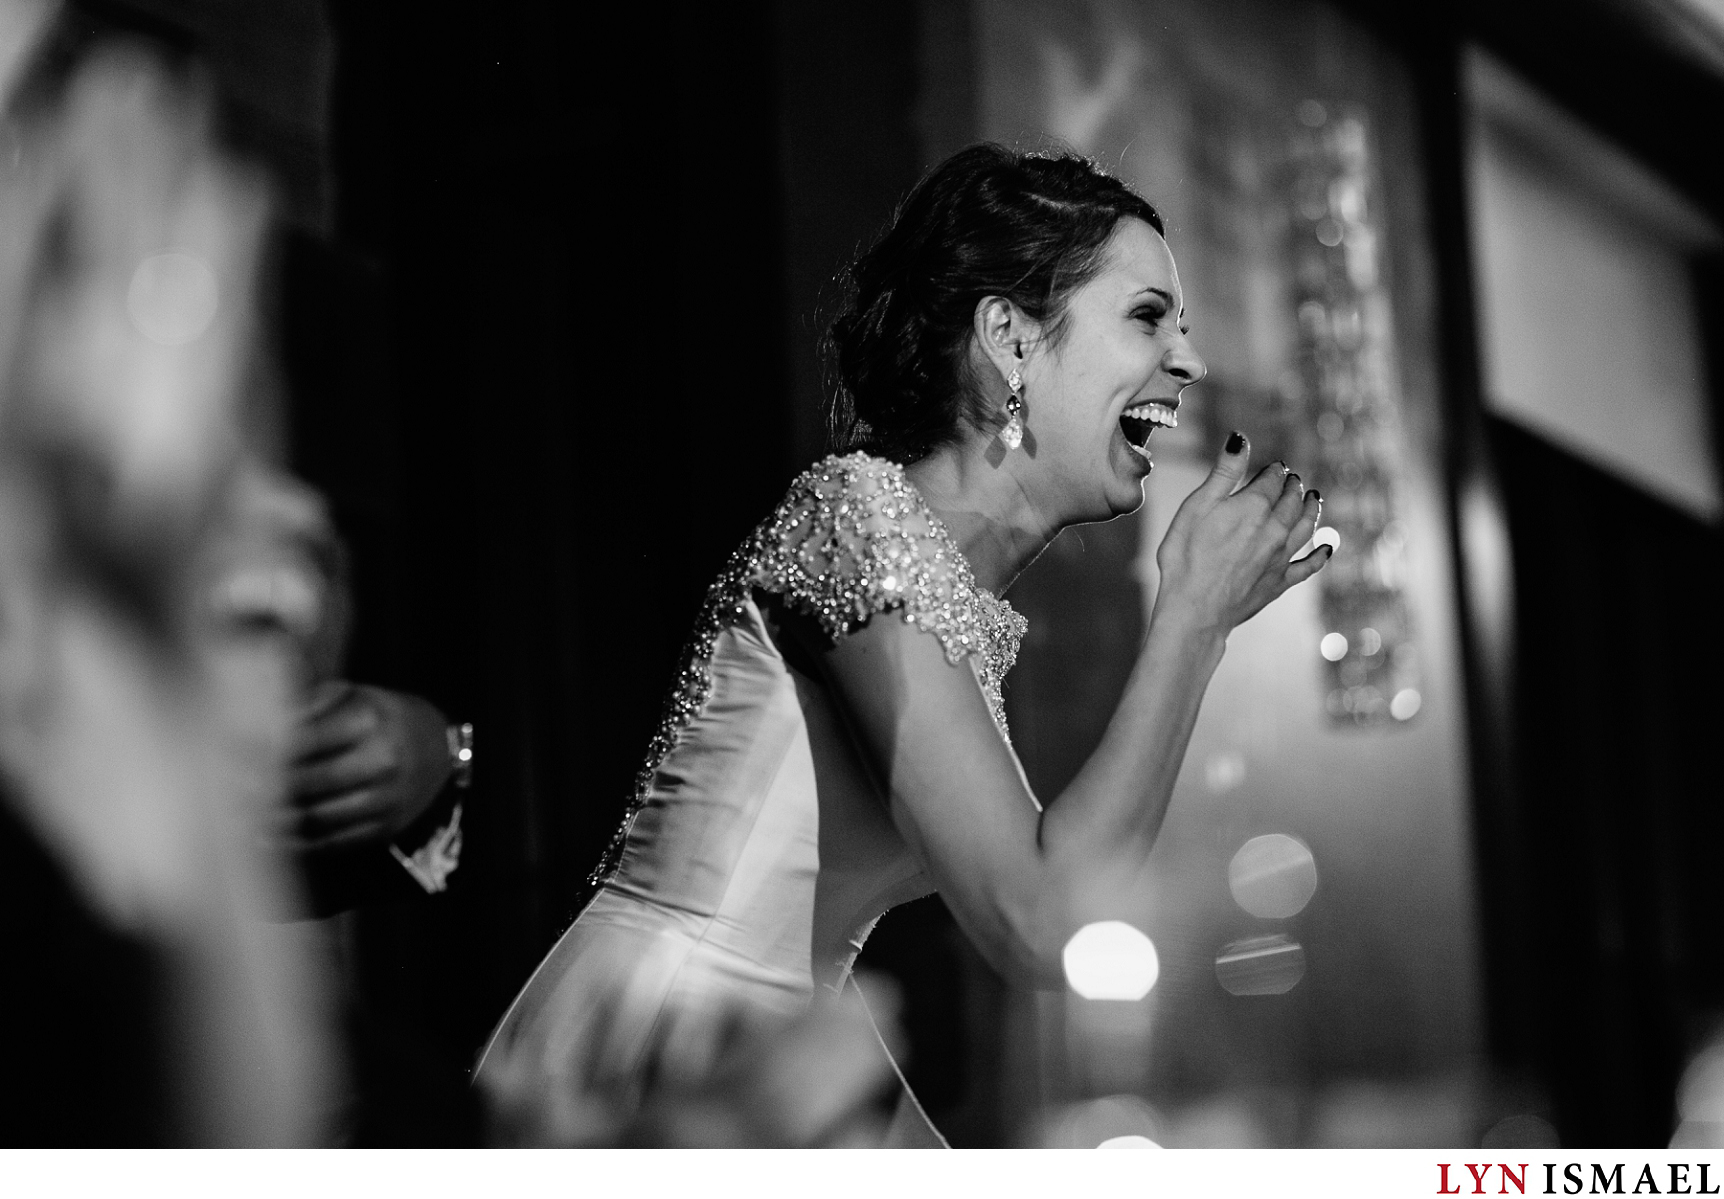 A happy bride reacts to a slideshow her friends put together for her and her new husband at their wedding reception at the Grandview Room of Whistle Bear Golf Club in Cambridge, Ontario.